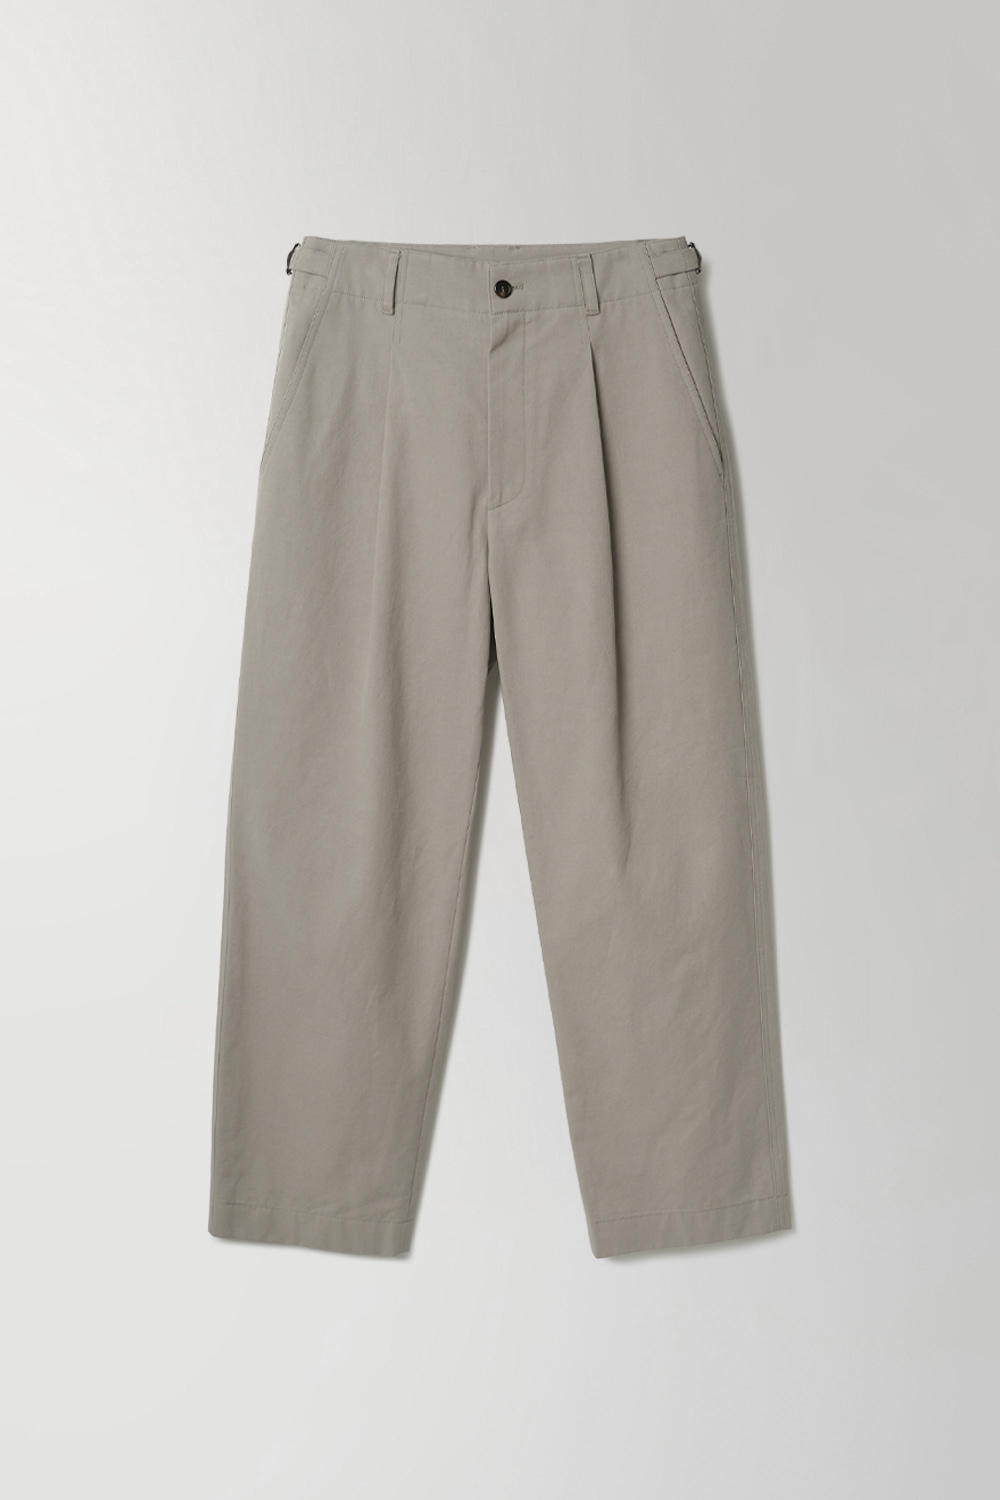 [2ND] STRUCTURED CHINO PANTS - FROST GREY